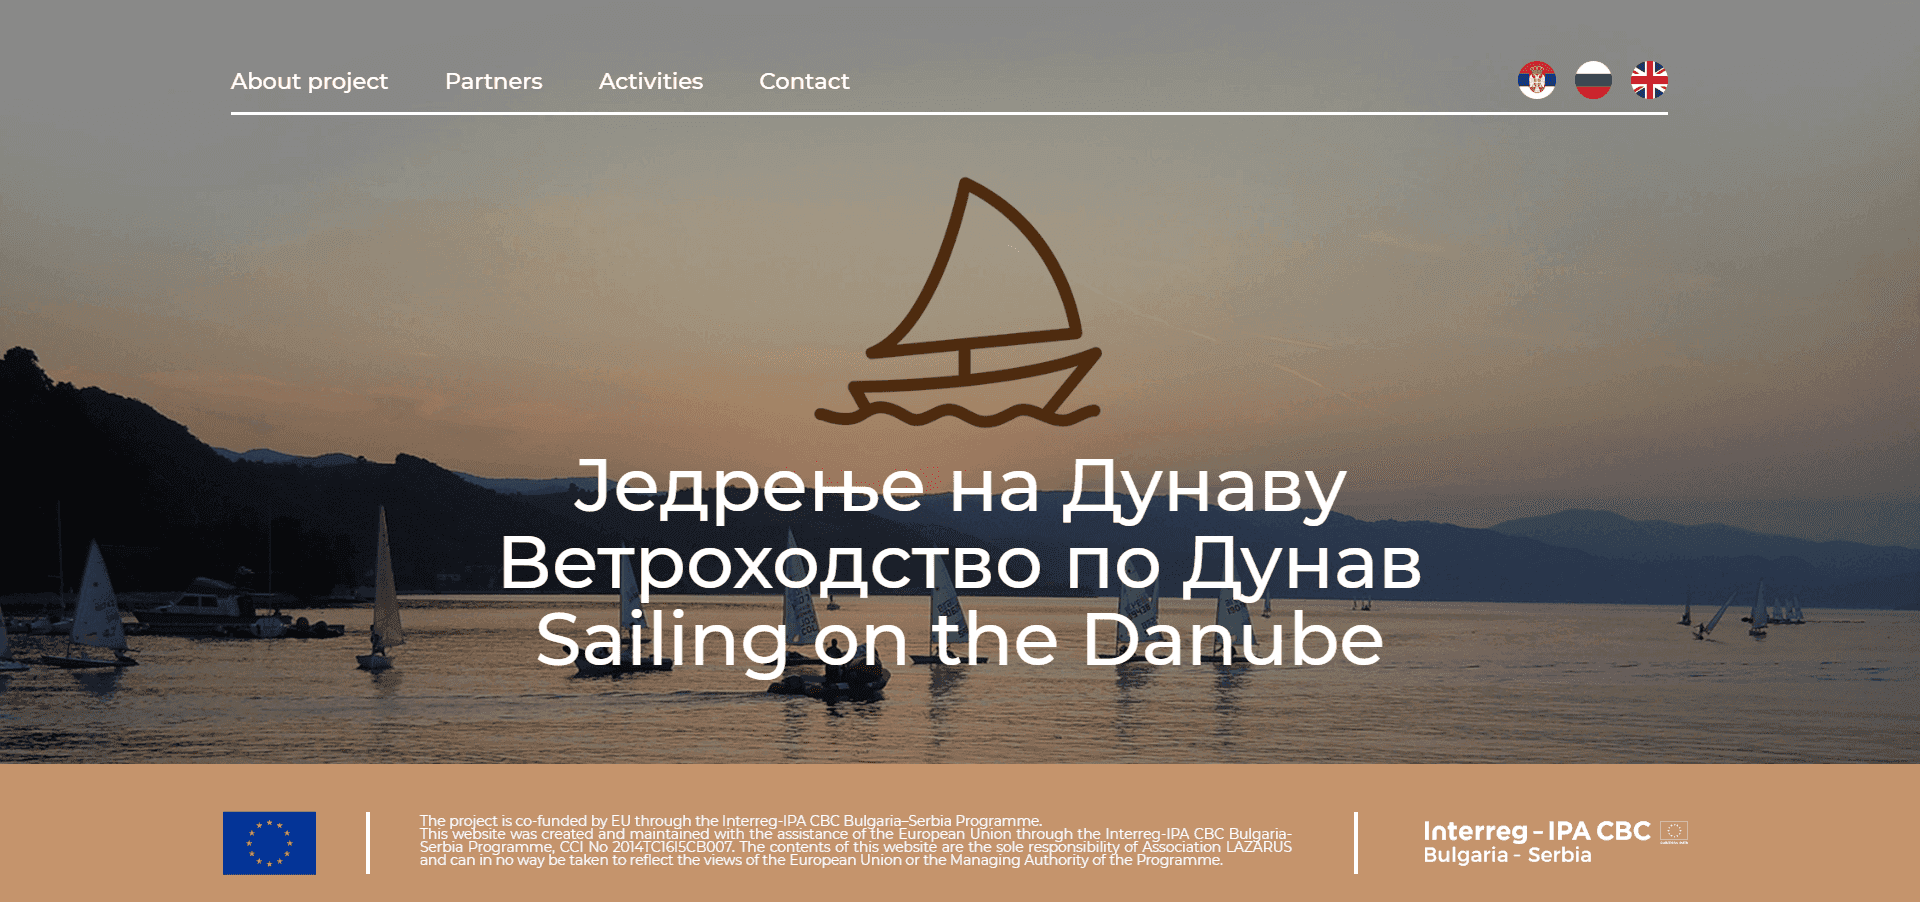 Sailing on the Danube